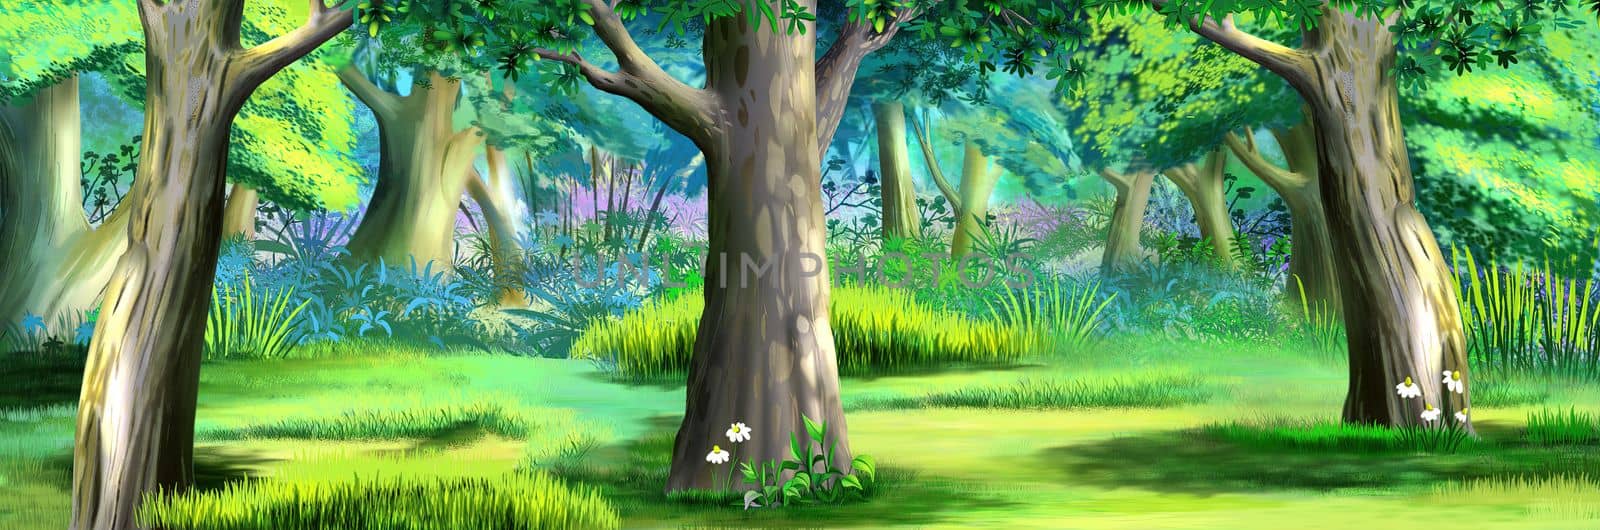 Tree trunk in a forest illustration by Multipedia